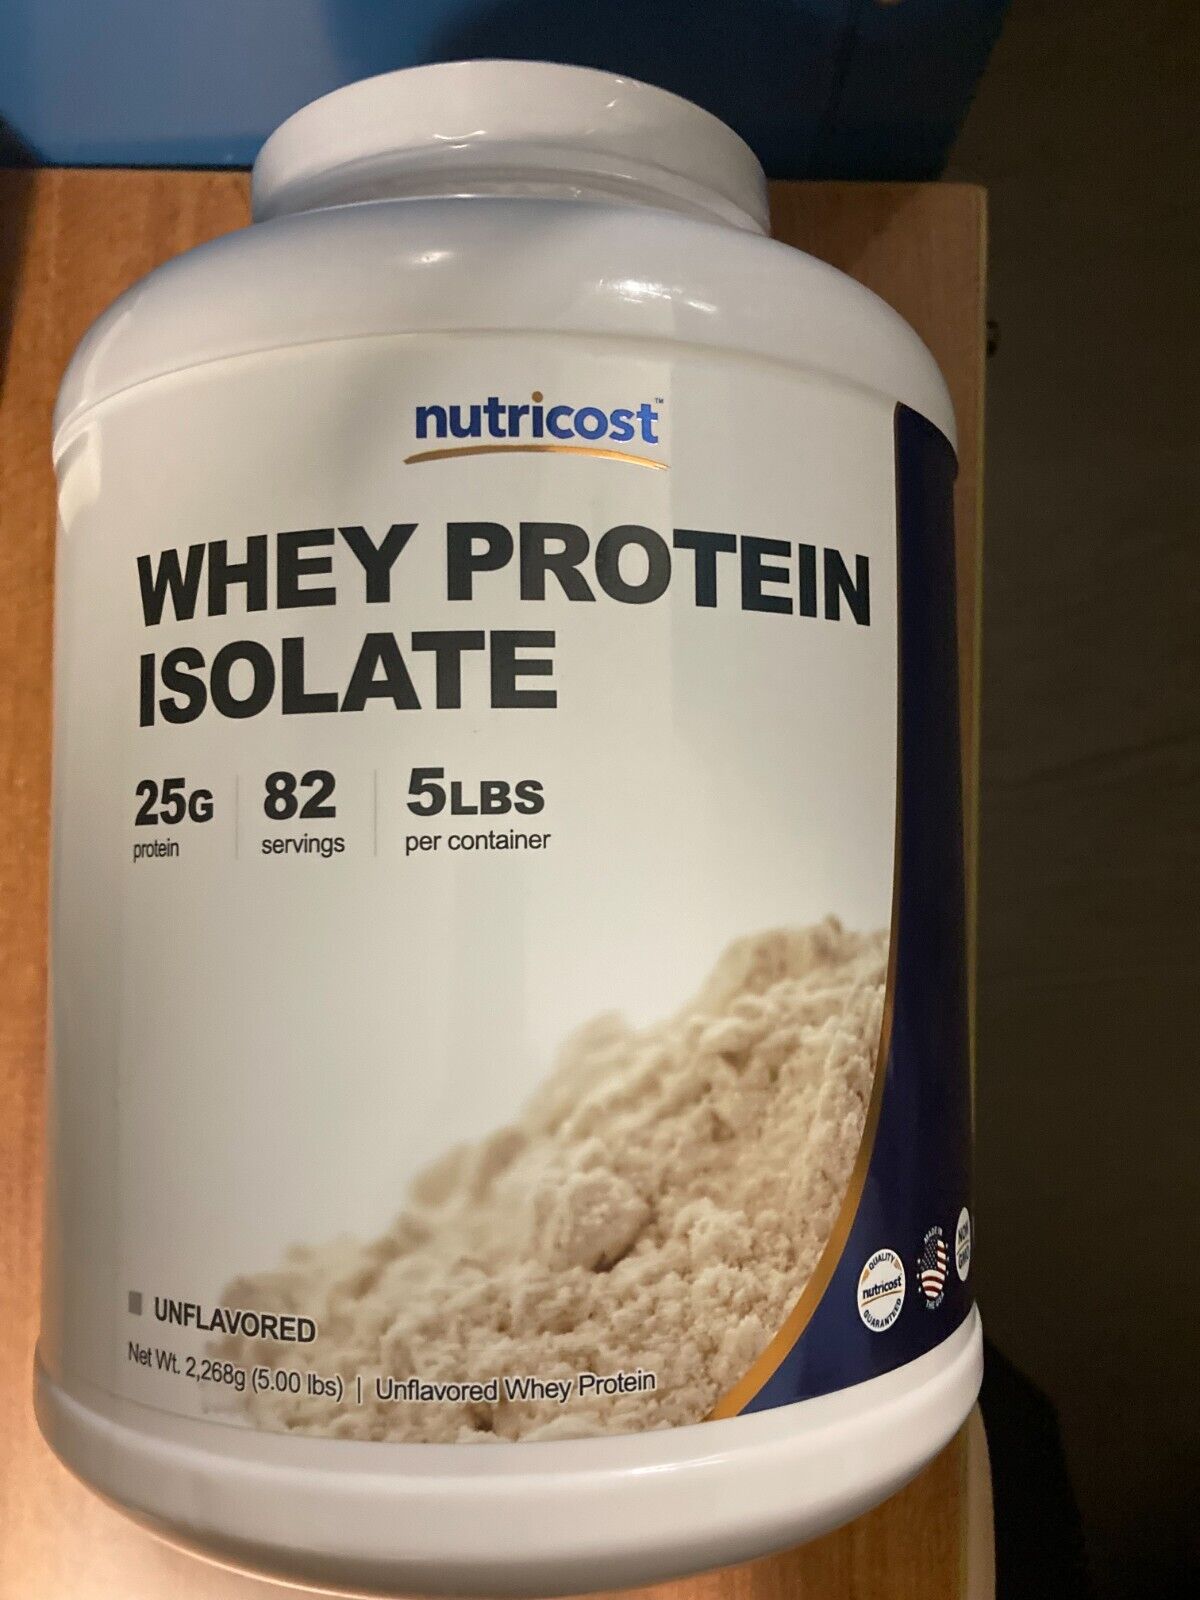 Nutricost Whey Protein Isolate 5 lbs 82 Servings Unflavored 